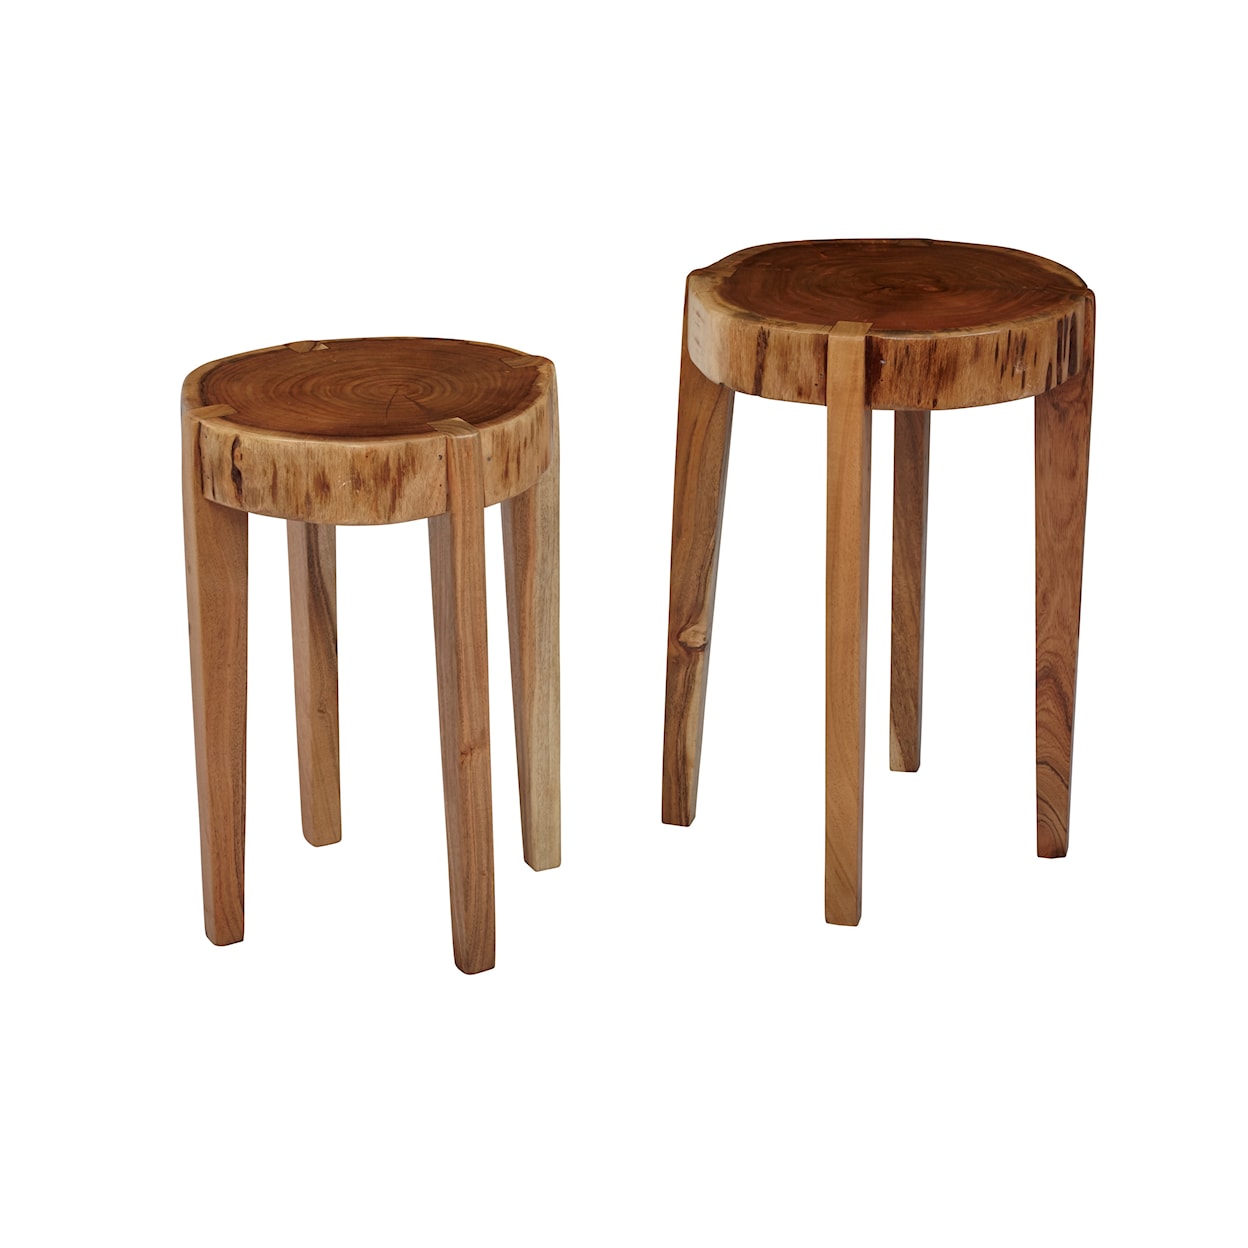 Jofran Global Archive Set of 2 Accent Tables